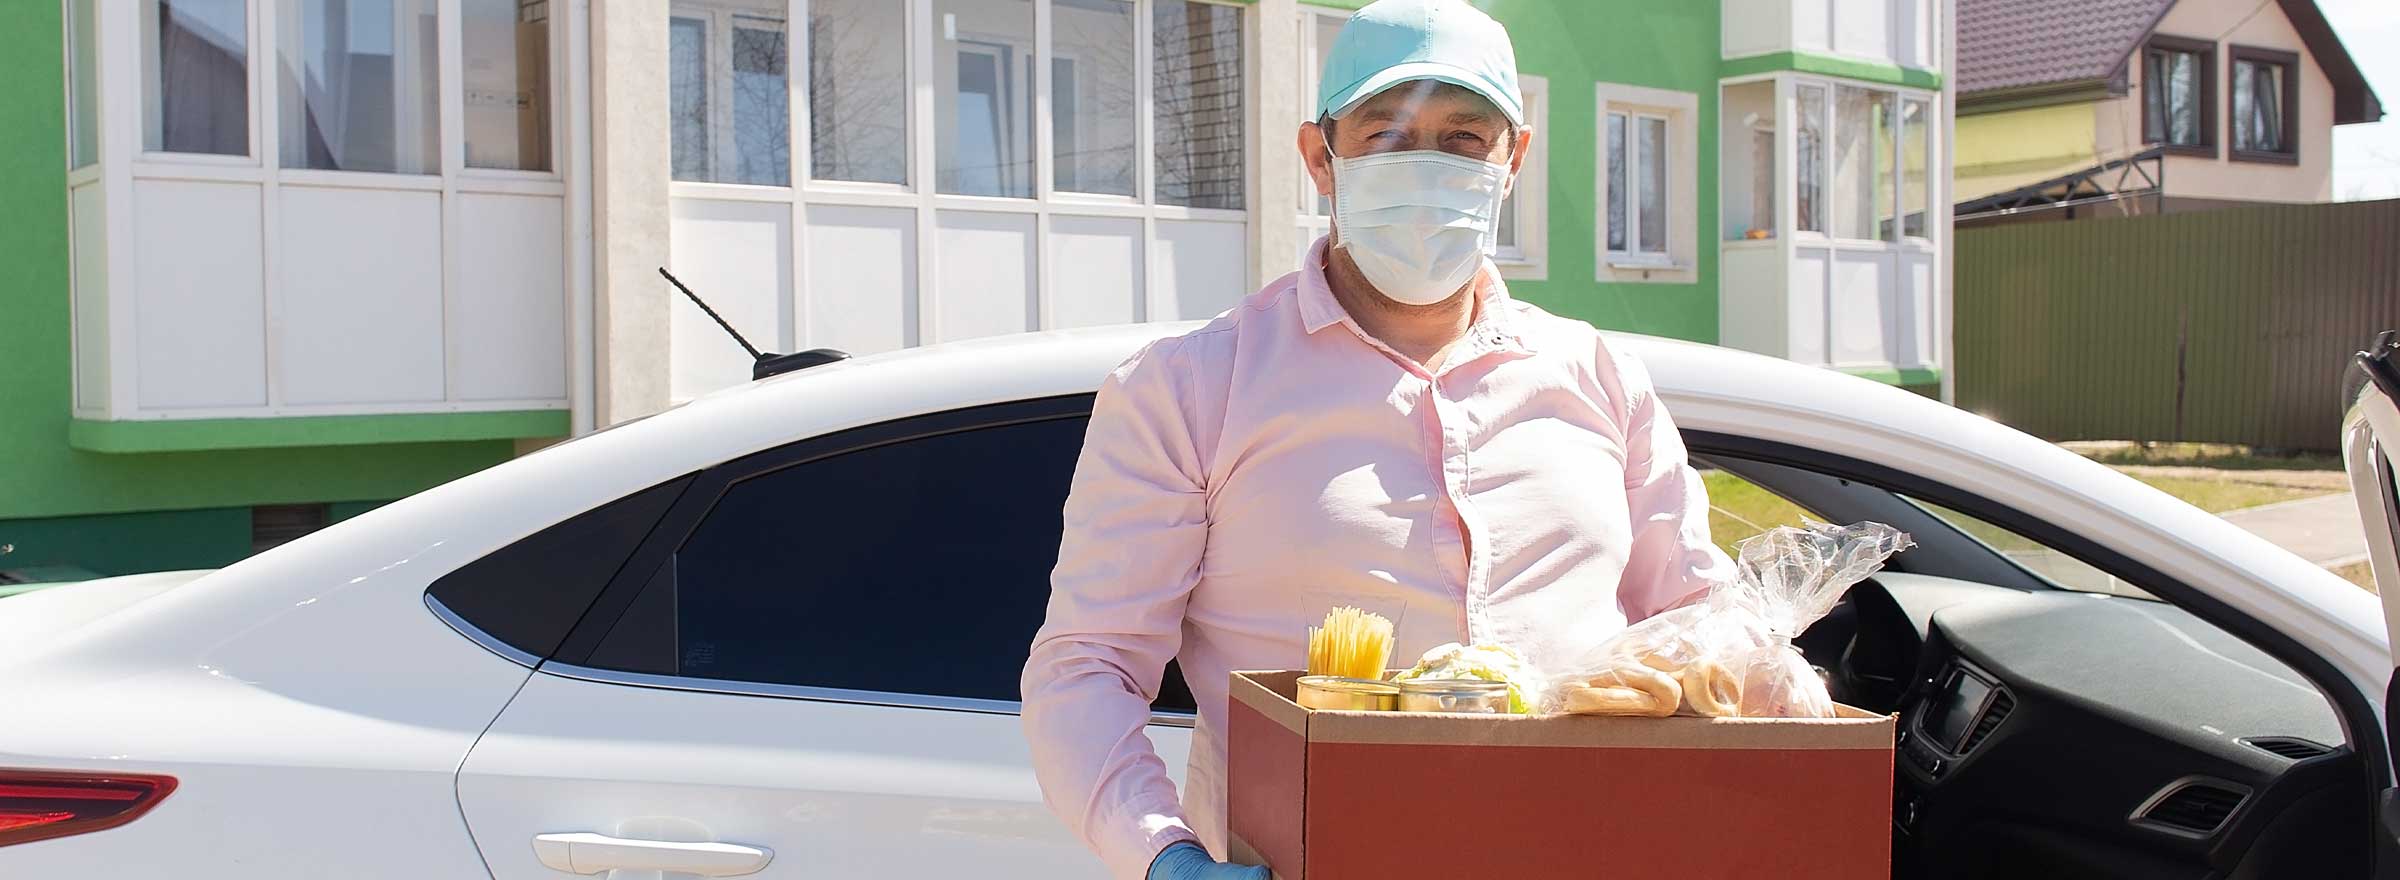 man in a face mask carrying a box of food in a residential neighborhood